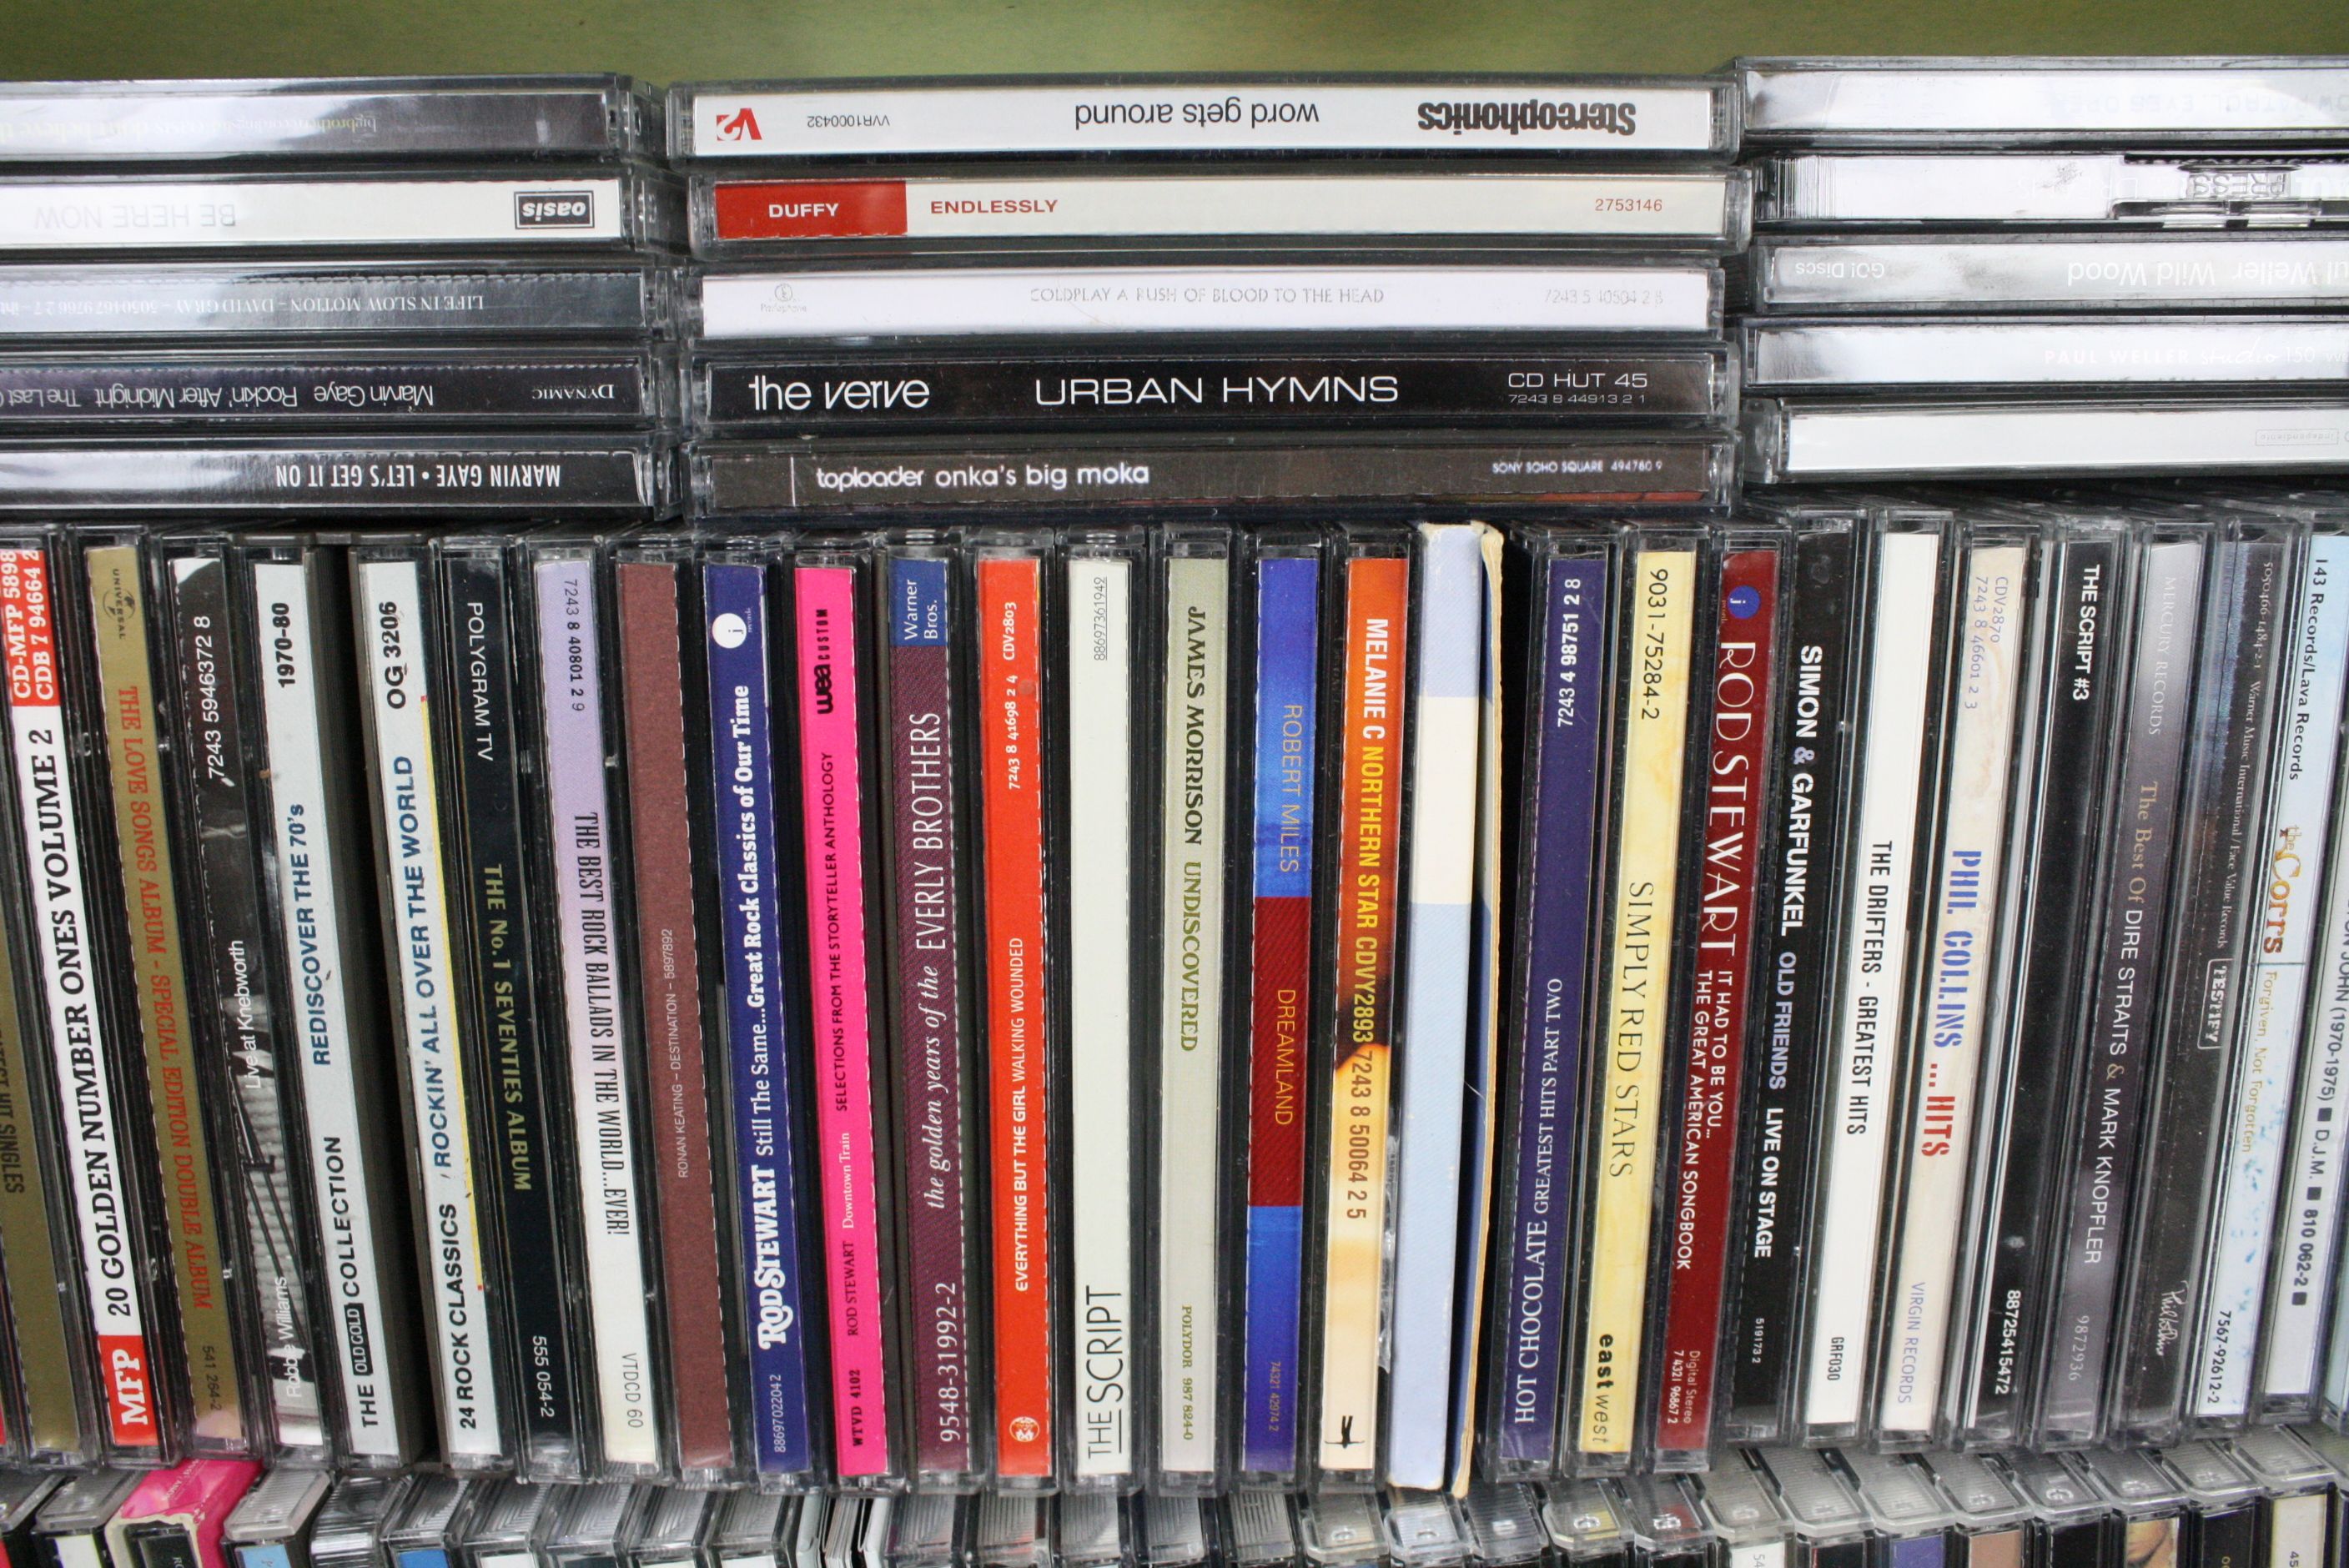 CDs - Over 140 CDs spanning genres and decades including 90s indie, 60s & 70s classic rock, soul, - Image 9 of 13